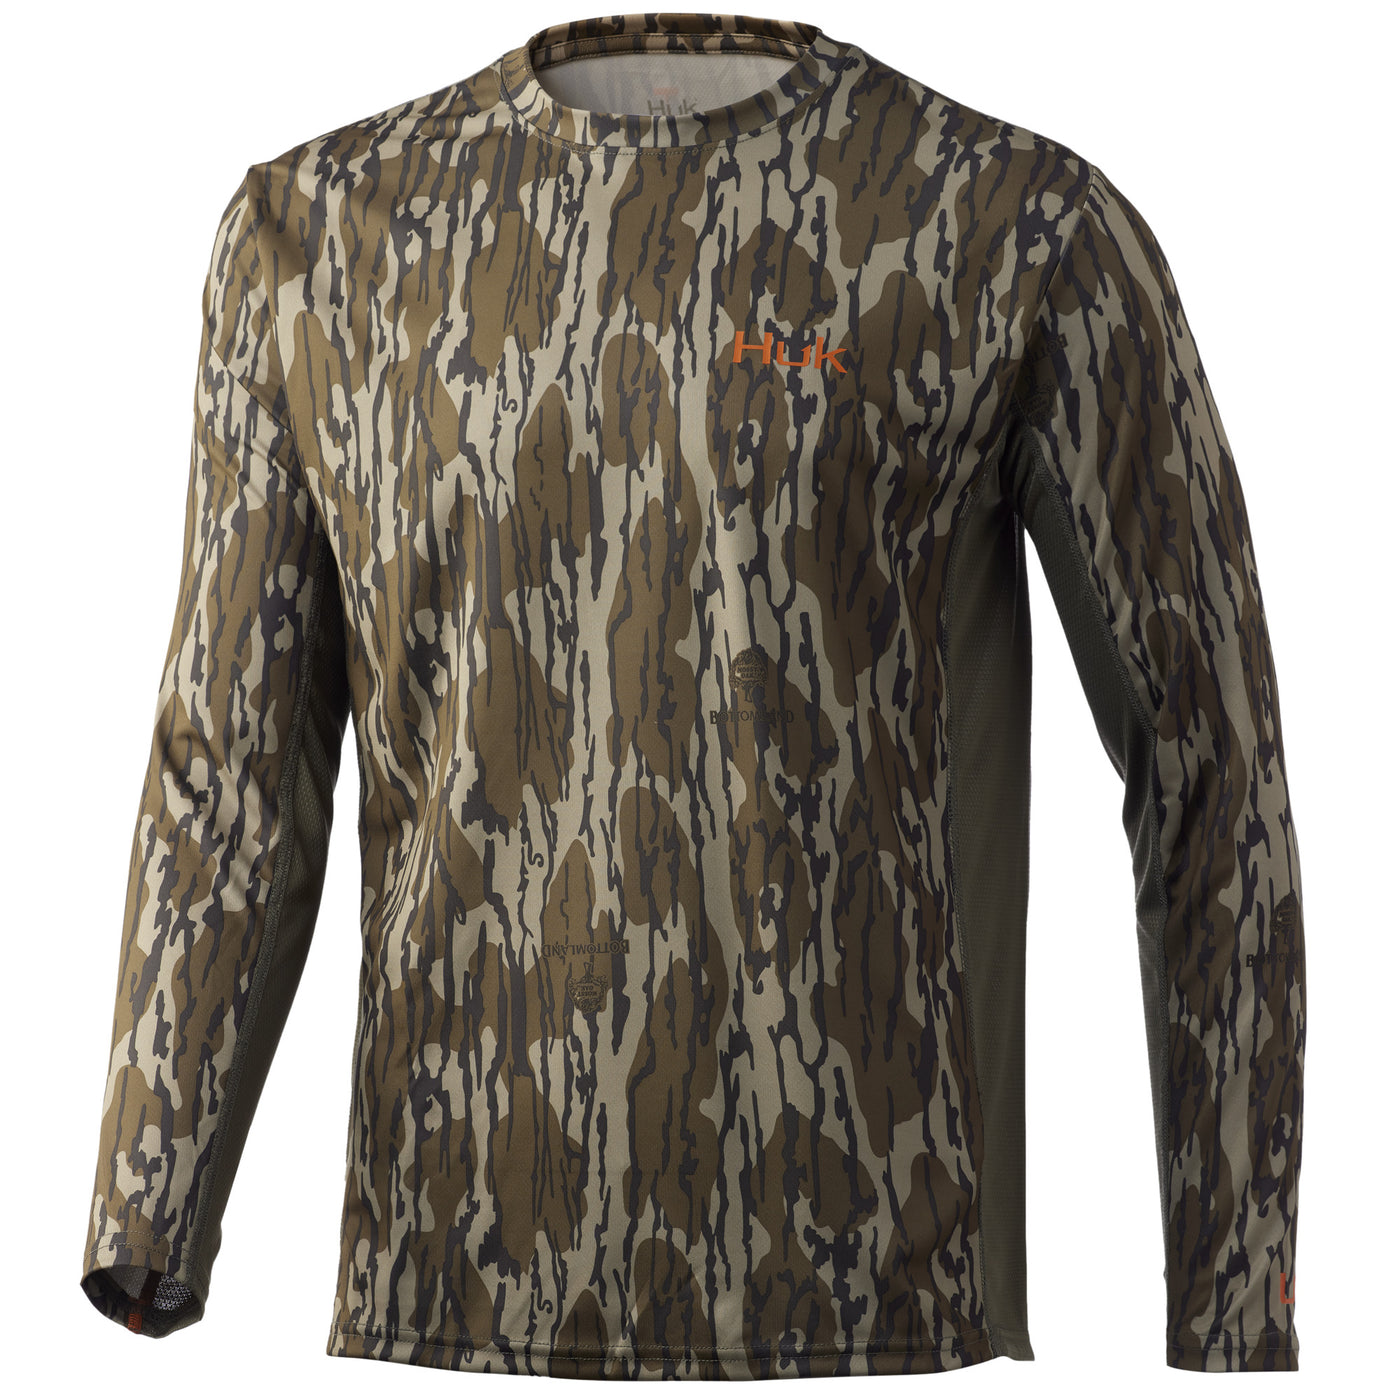 Huk Men's Icon X Lichen Small Solid Long Sleeve Performance Fishing Hoodie  